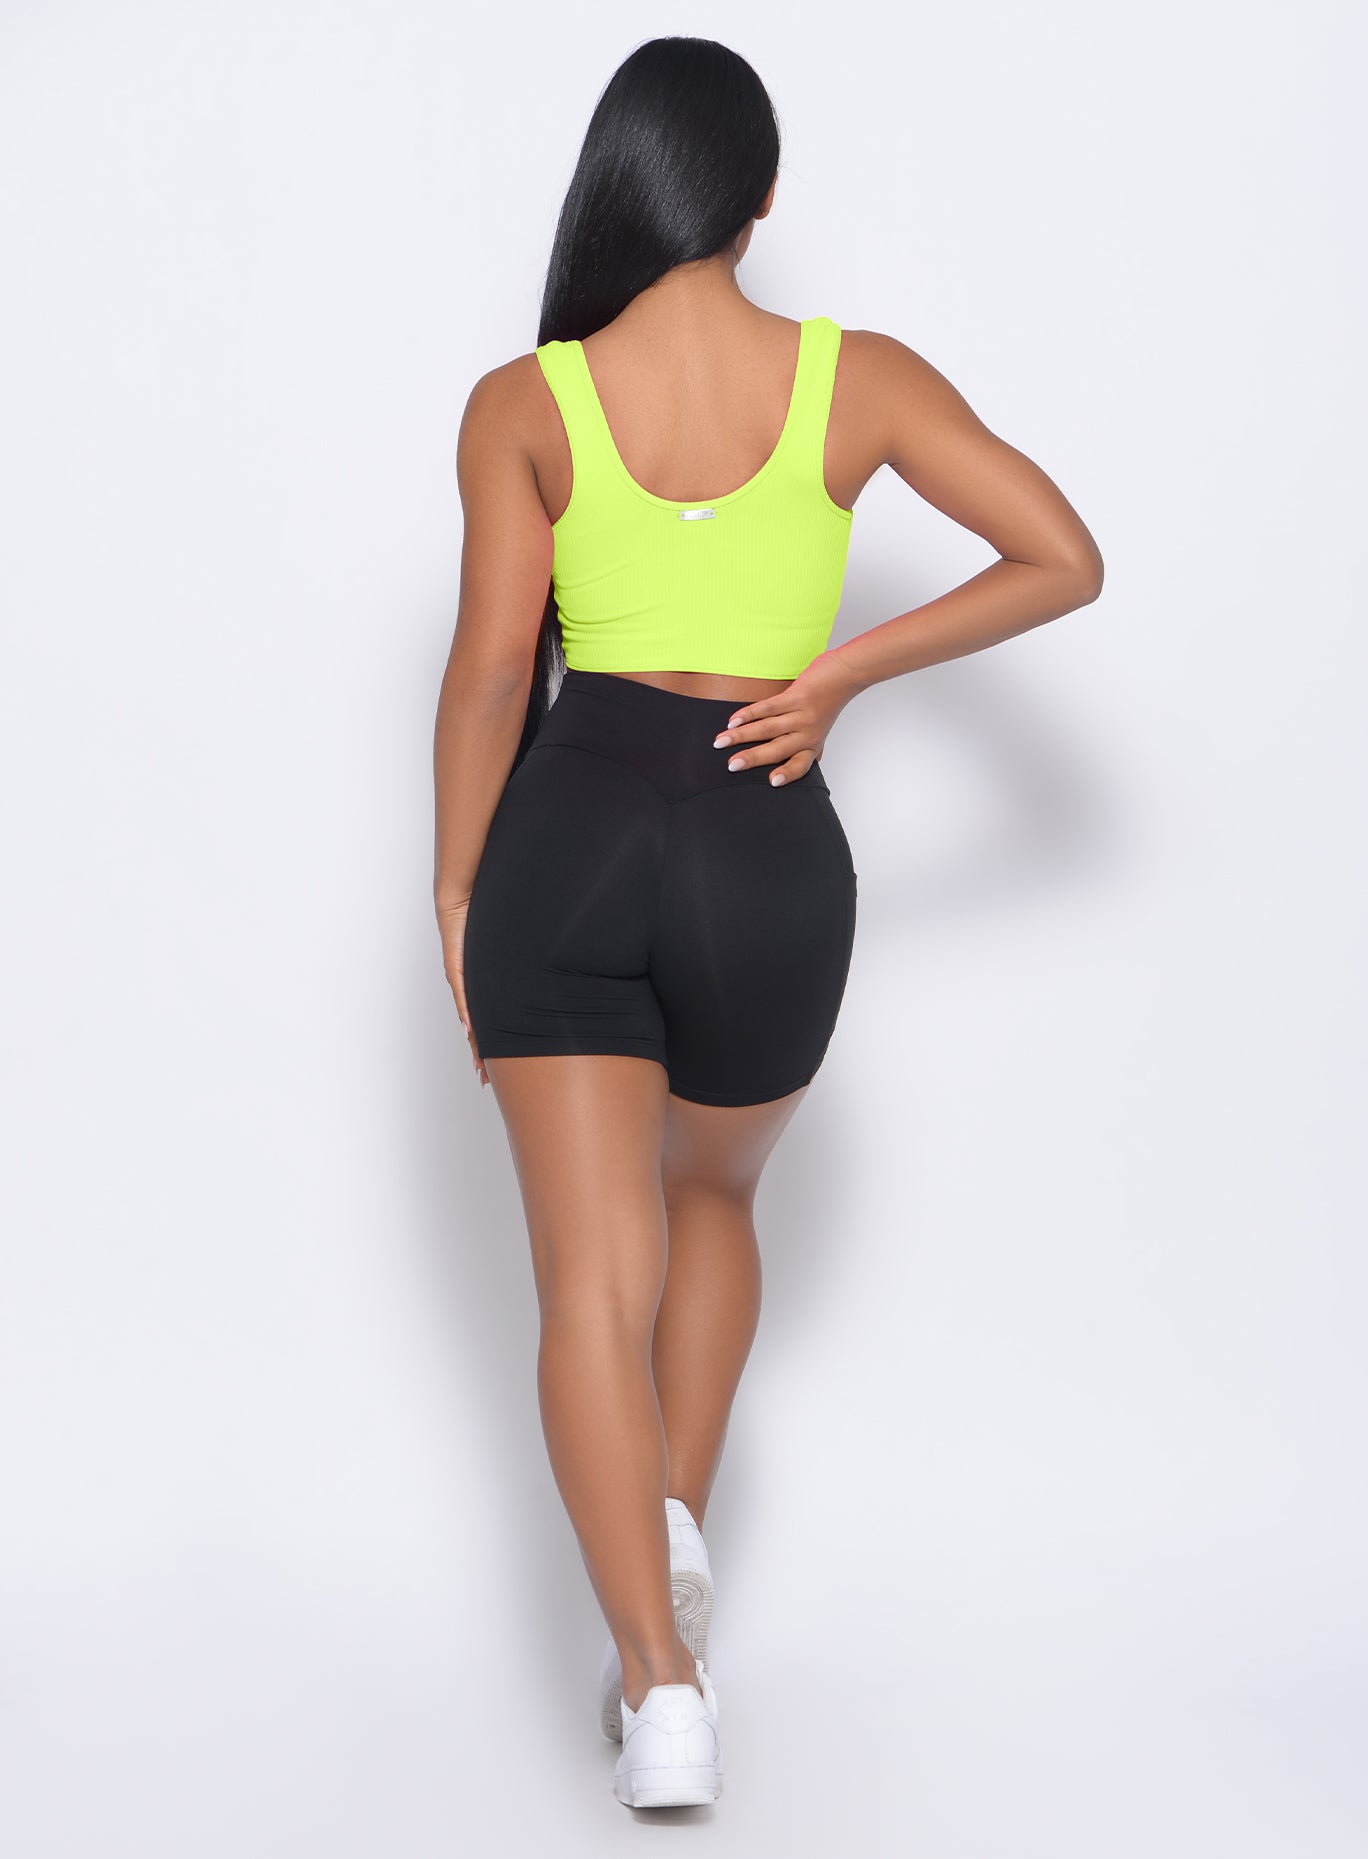 Back view of the model wearing our henley sports bra in neon yellow and a black shorts